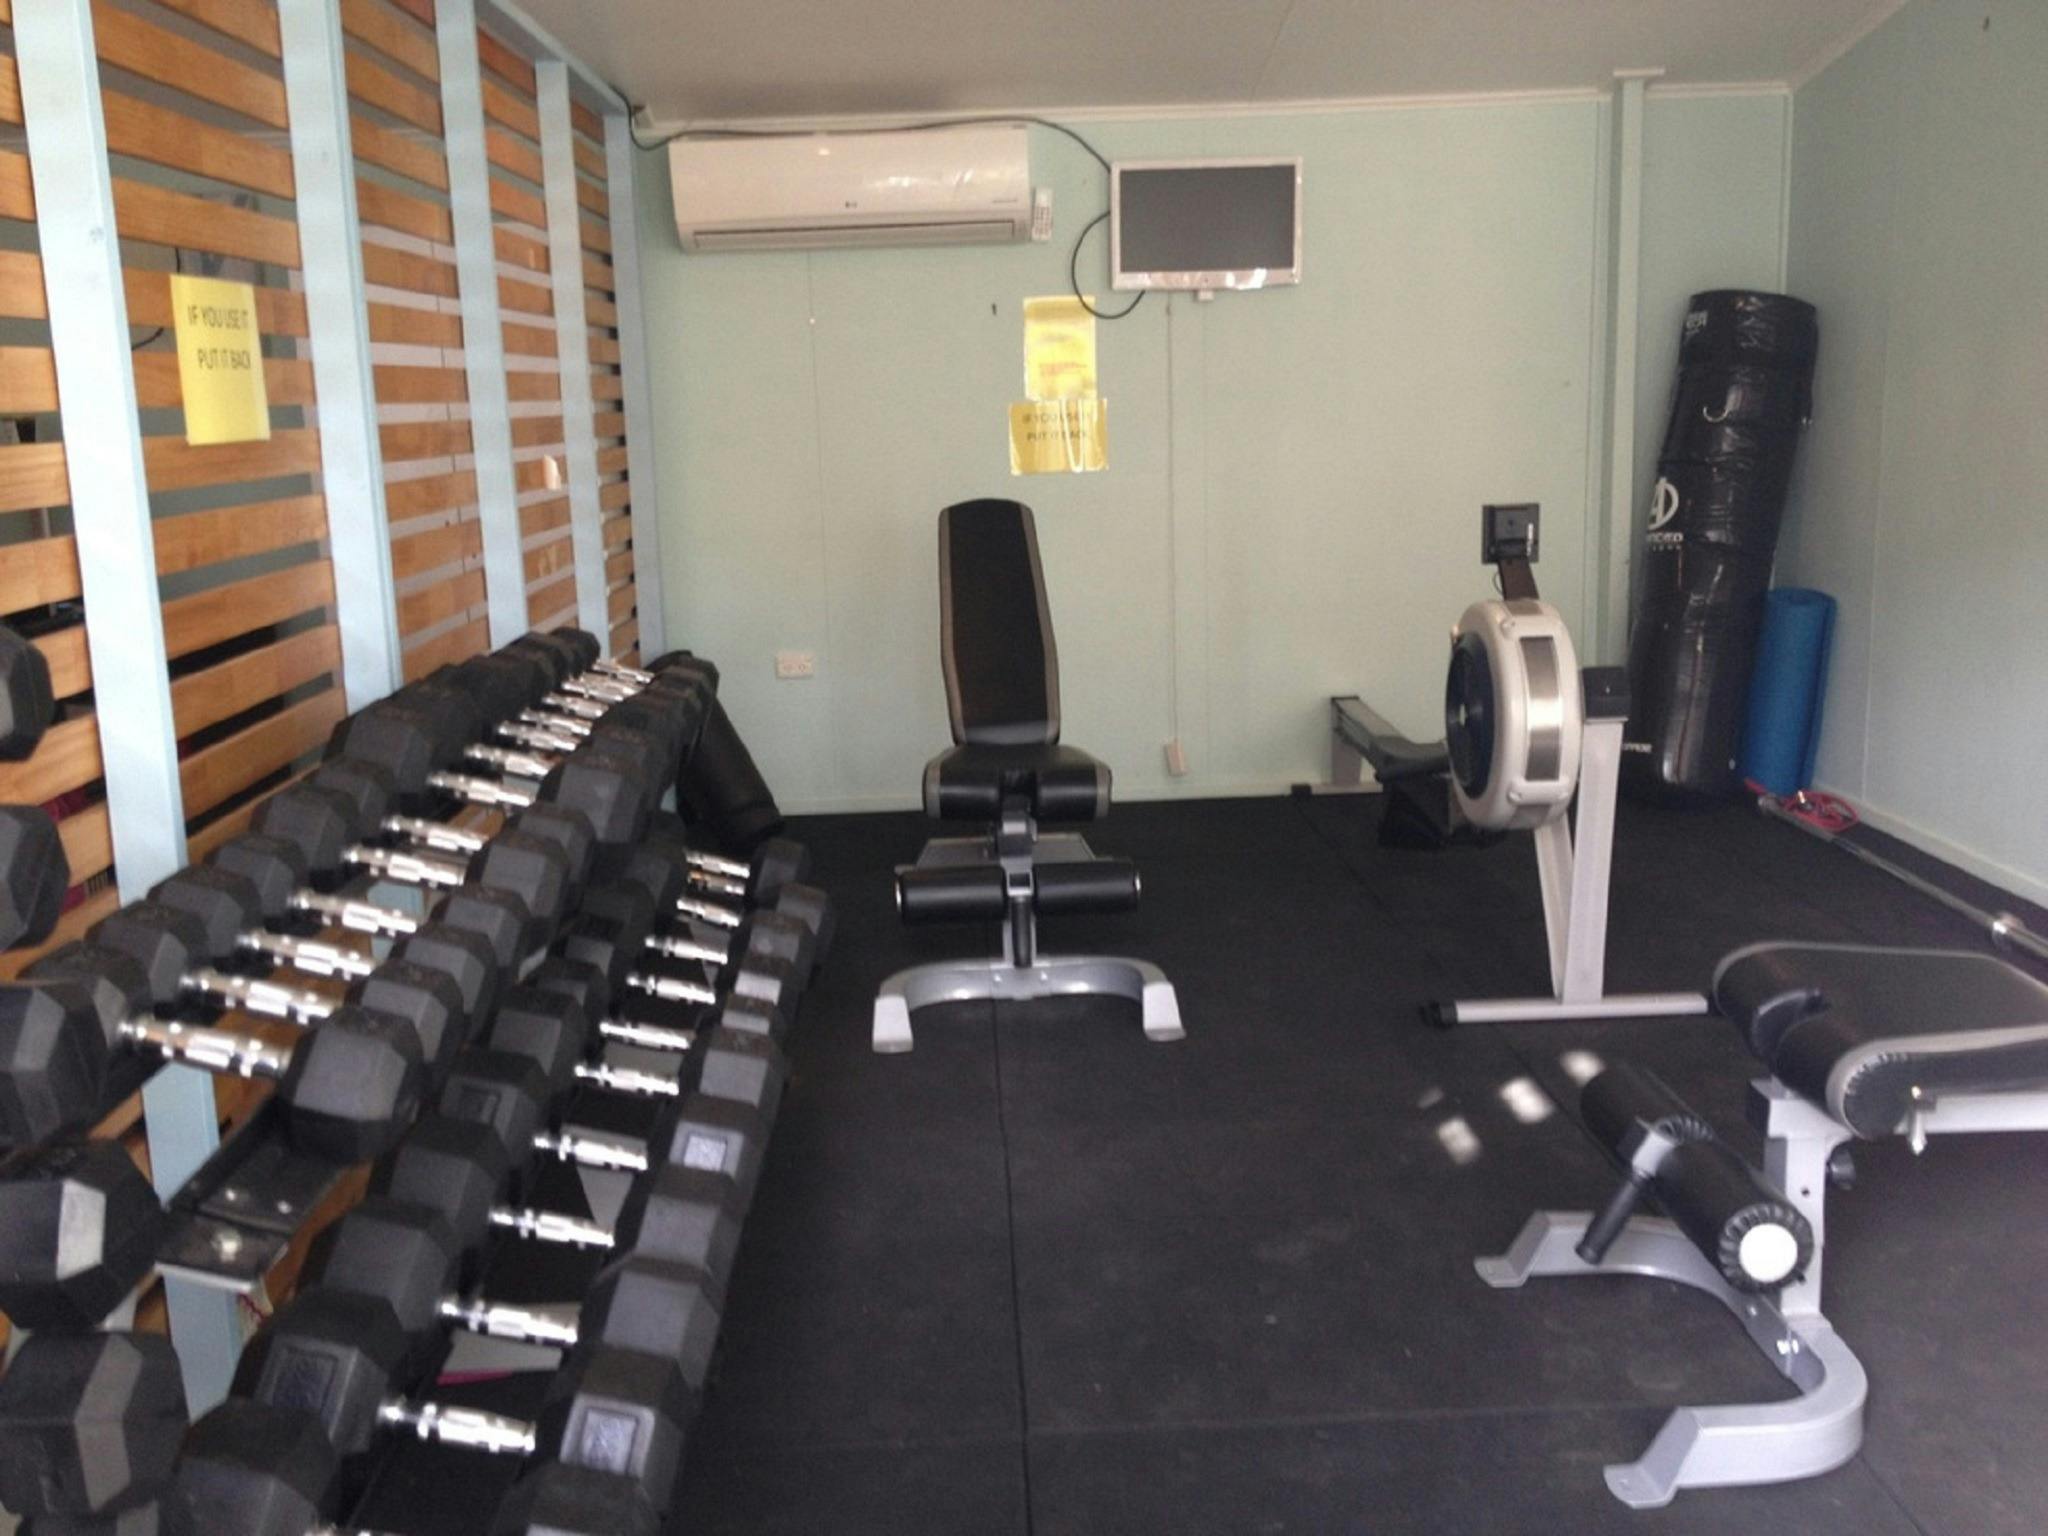 Well kitted out gym for our guests